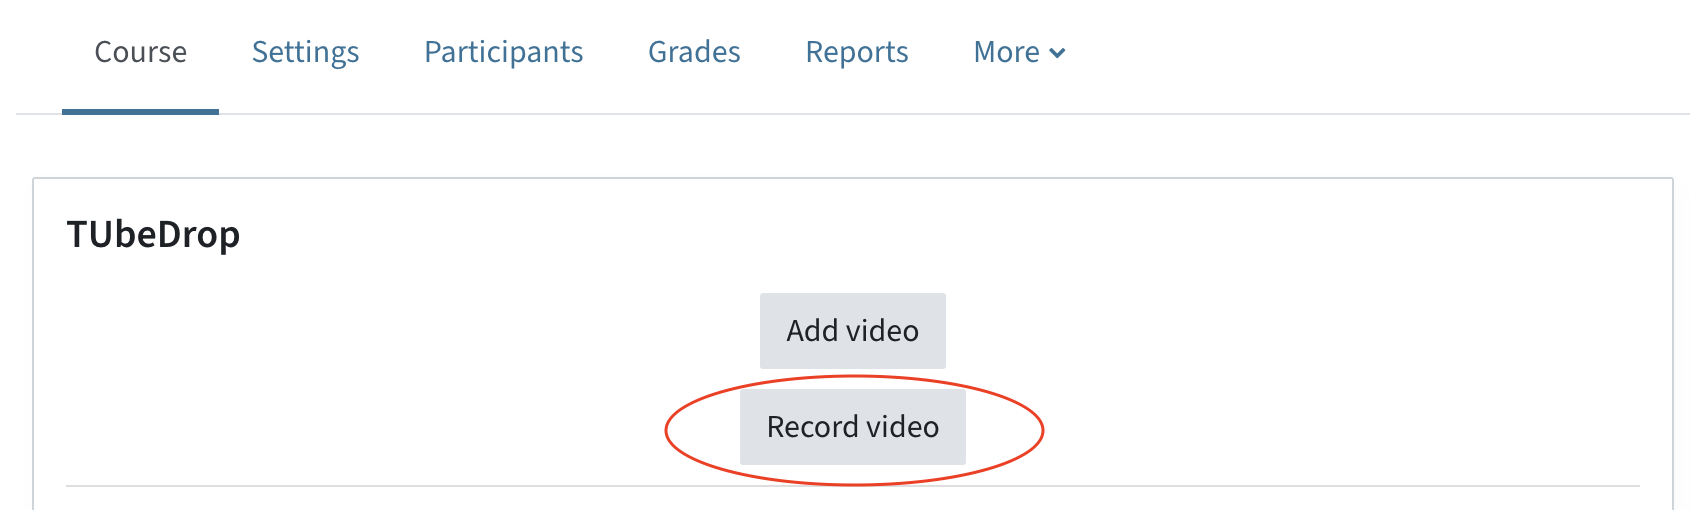 TUbeDrop block with the buttons "Add video" and "Record video"